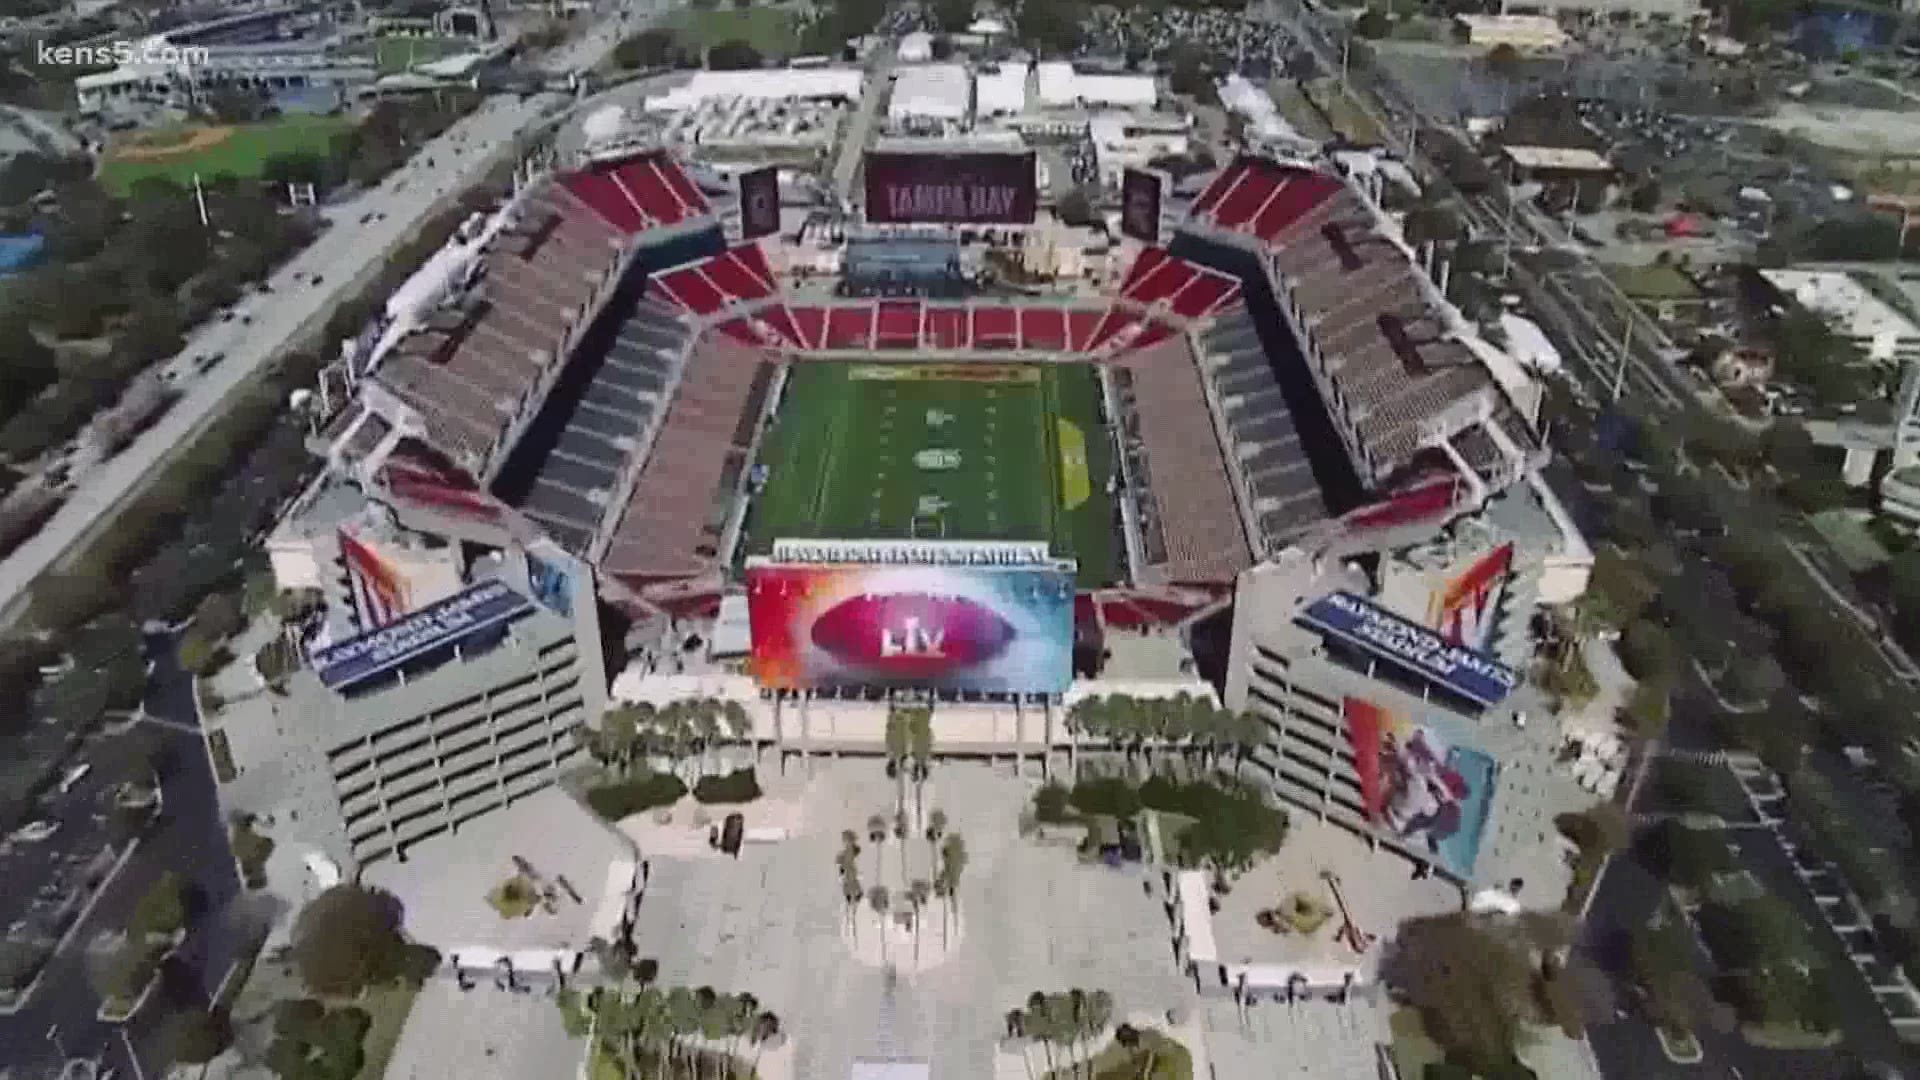 People are shelling out some serious cash to get into the Super Bowl in Tampa. Ticket prices are predicted to be some of the most expensive ever.